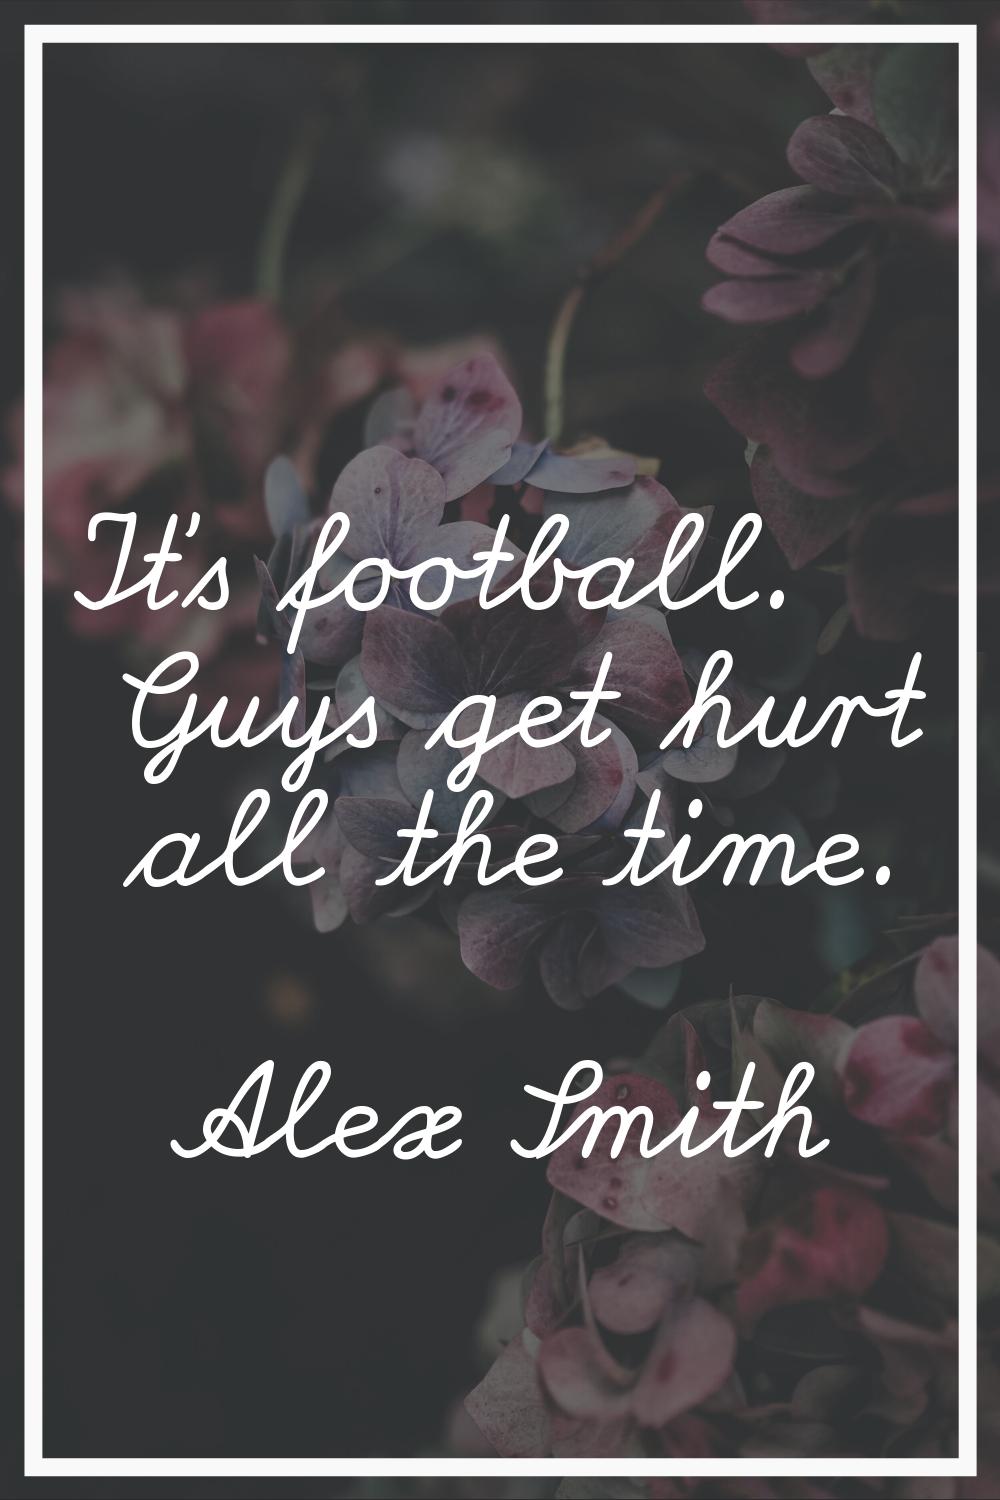 It's football. Guys get hurt all the time.